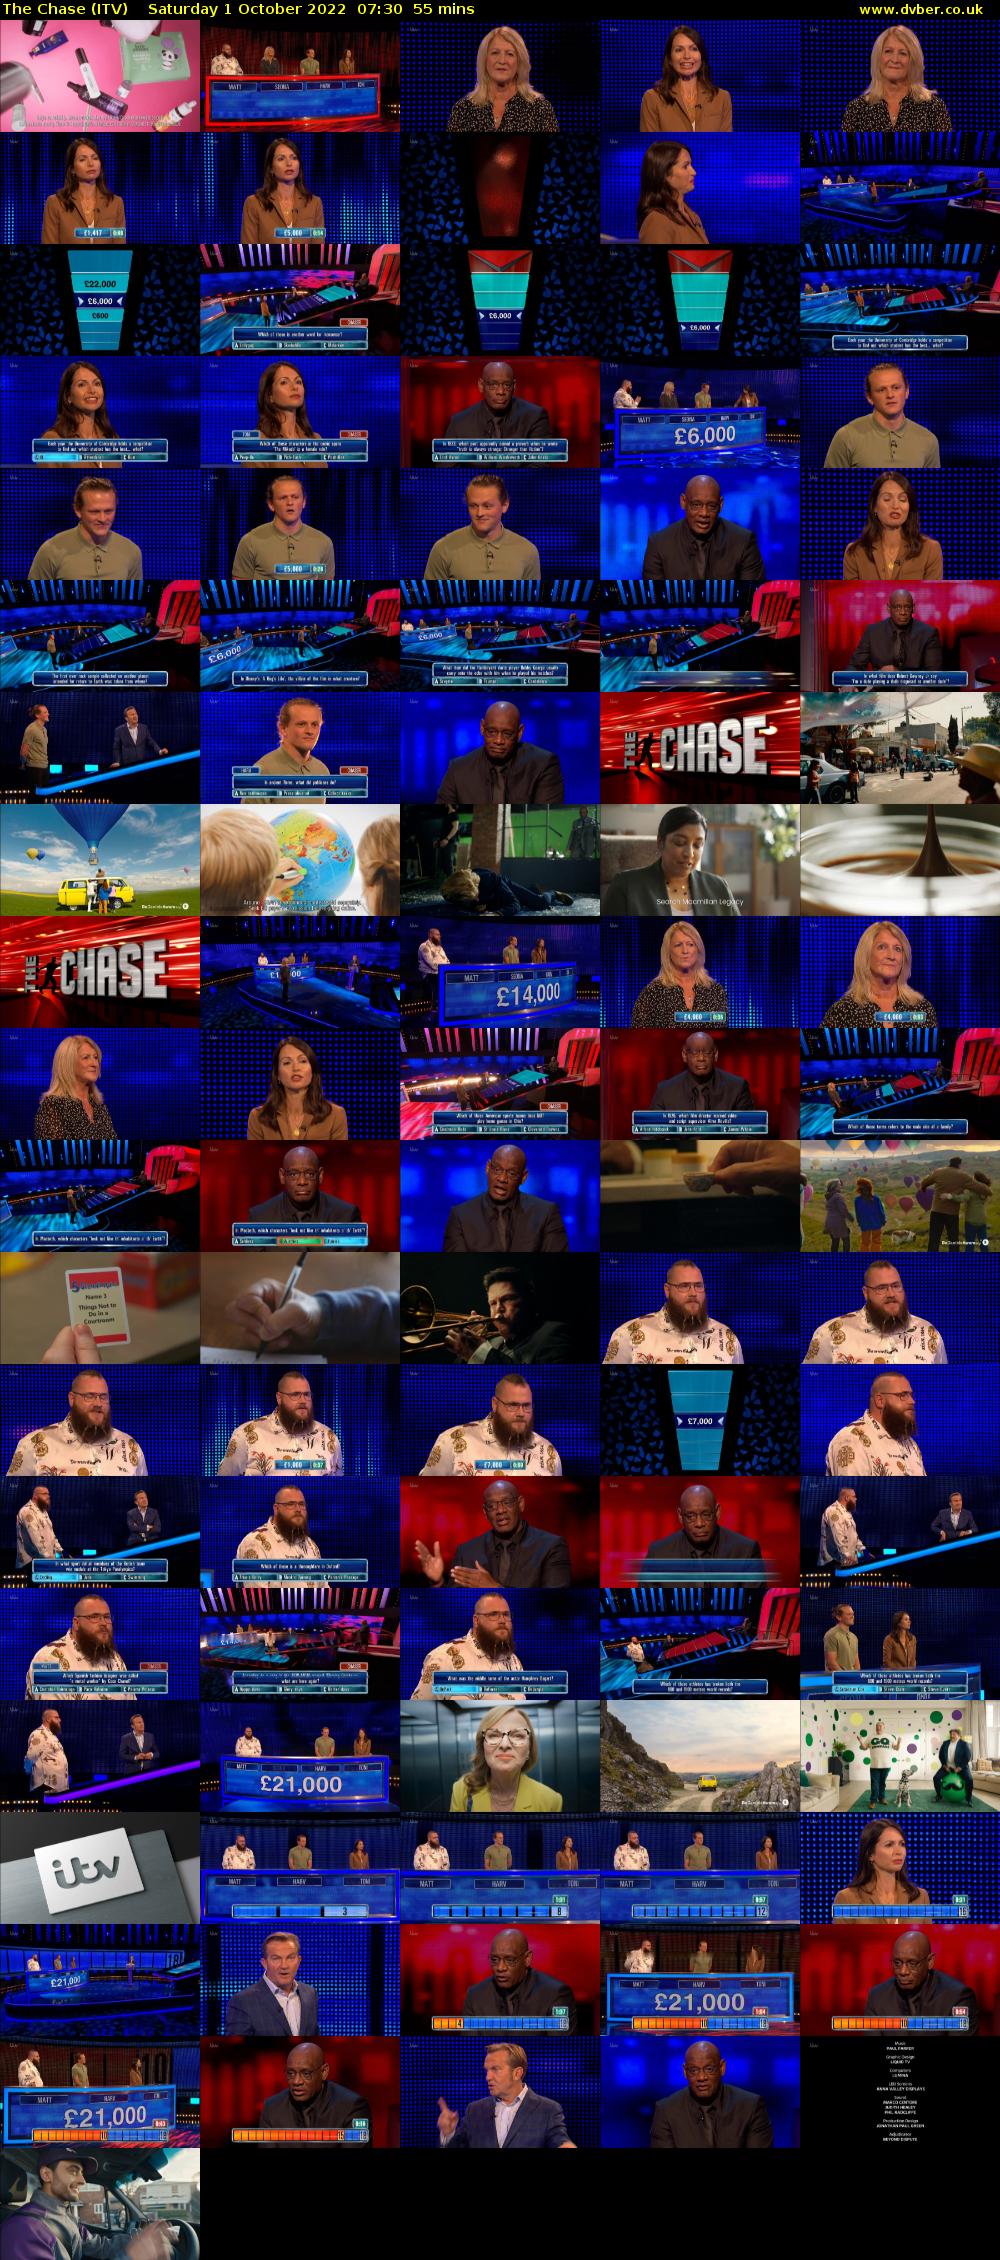 The Chase (ITV) Saturday 1 October 2022 07:30 - 08:25